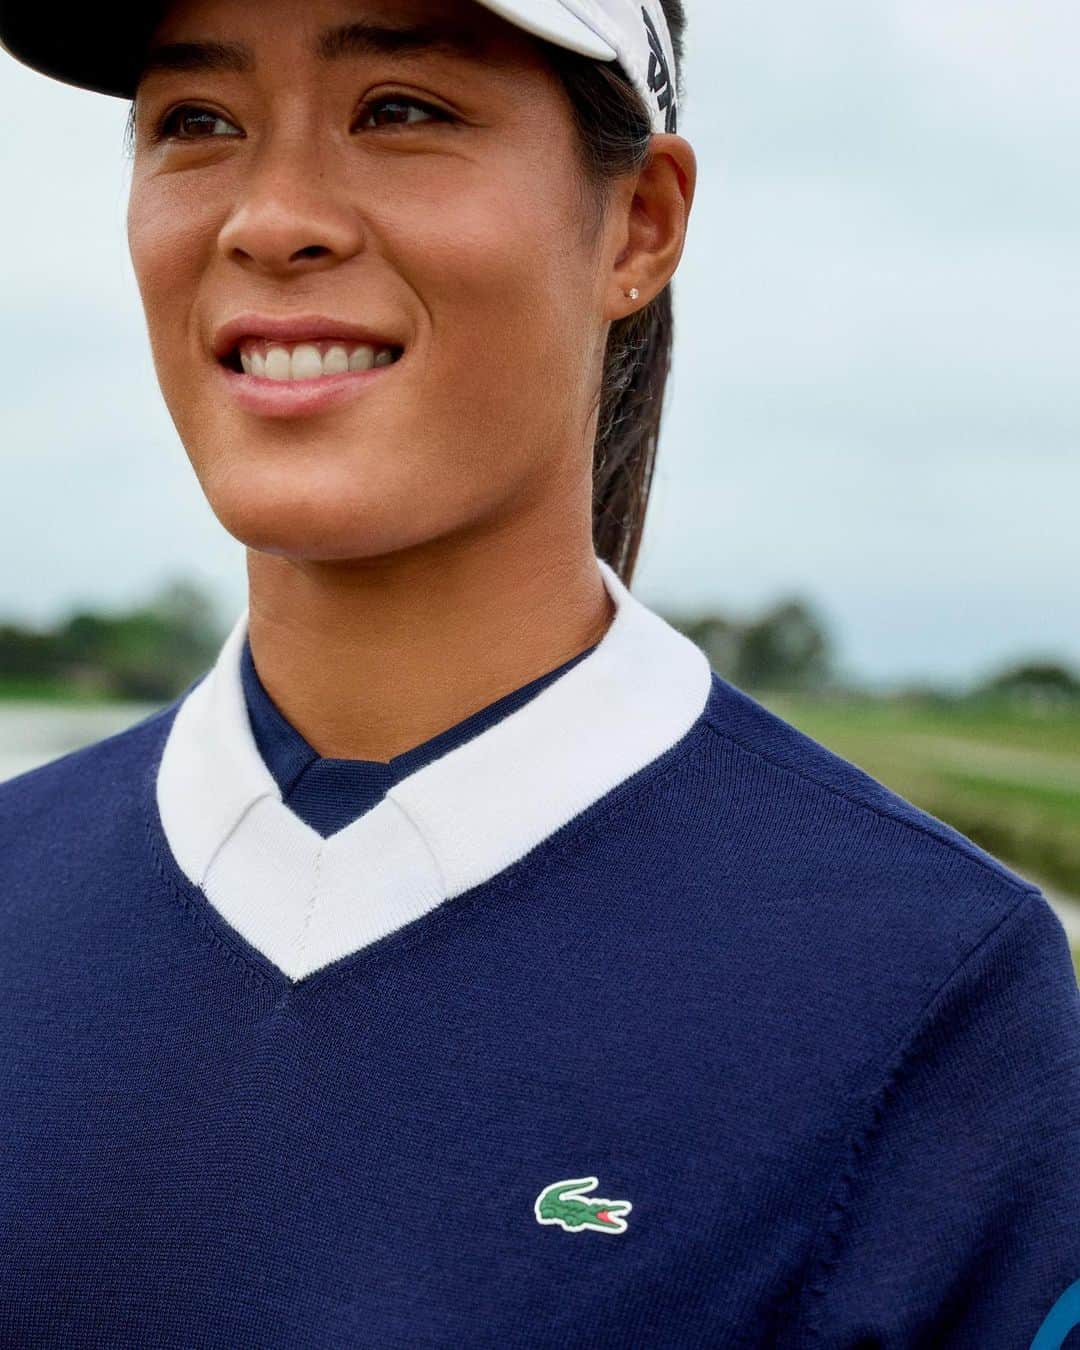 Lacosteのインスタグラム：「Break new ground. @celineboutier wins in Evian to capture first major victory. After Catherine Lacoste & @patriciameunierlebouc, she becomes the third Frenchwoman to win a Major 🇫🇷.   Congratulations to Céline and team.  1st Major title and counting…」